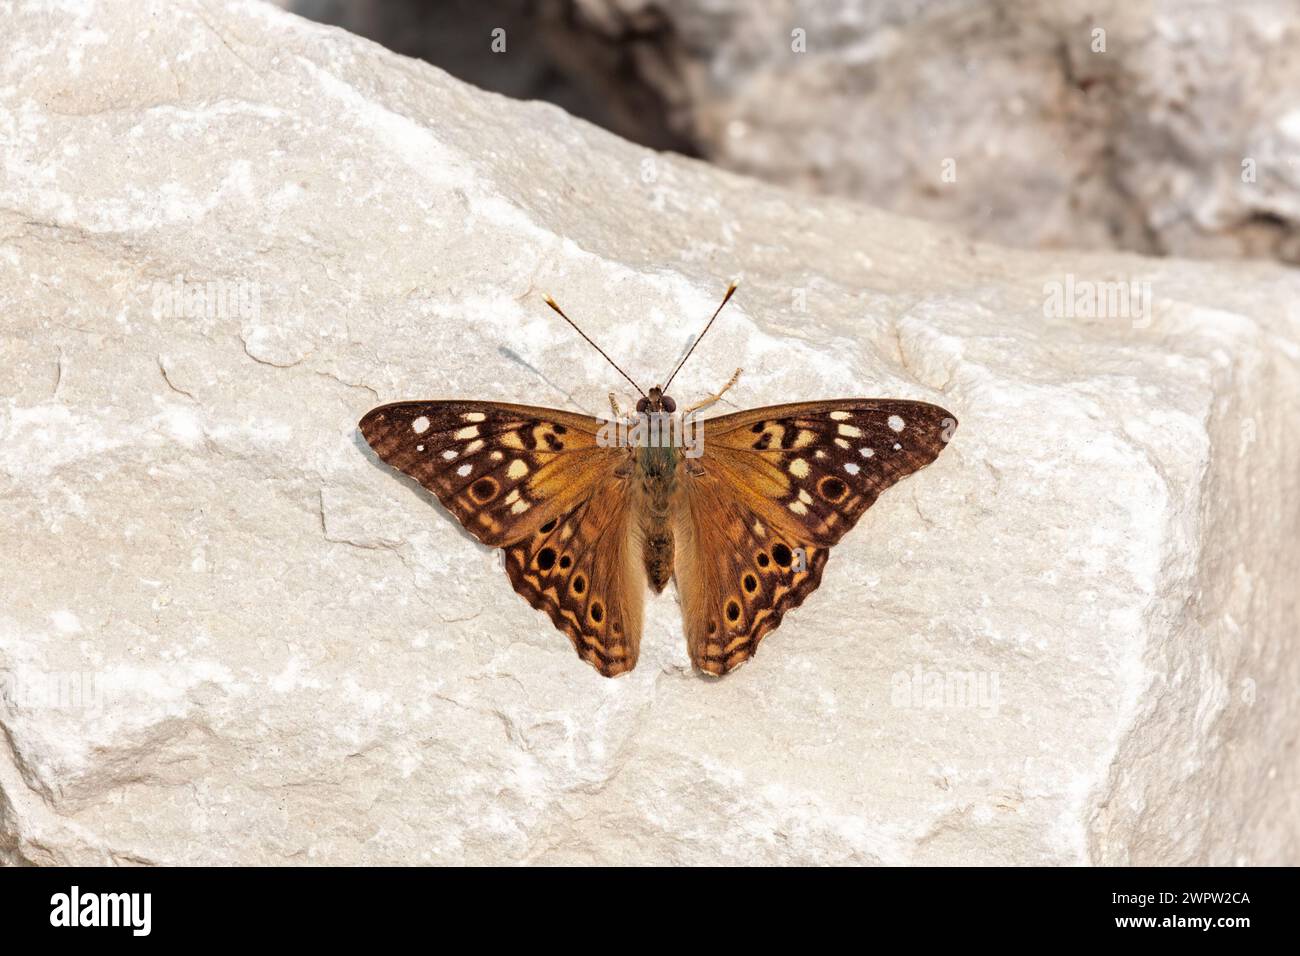 With is wings spread wide open, a hackberry emperor rests on a limestone booulder. Stock Photo